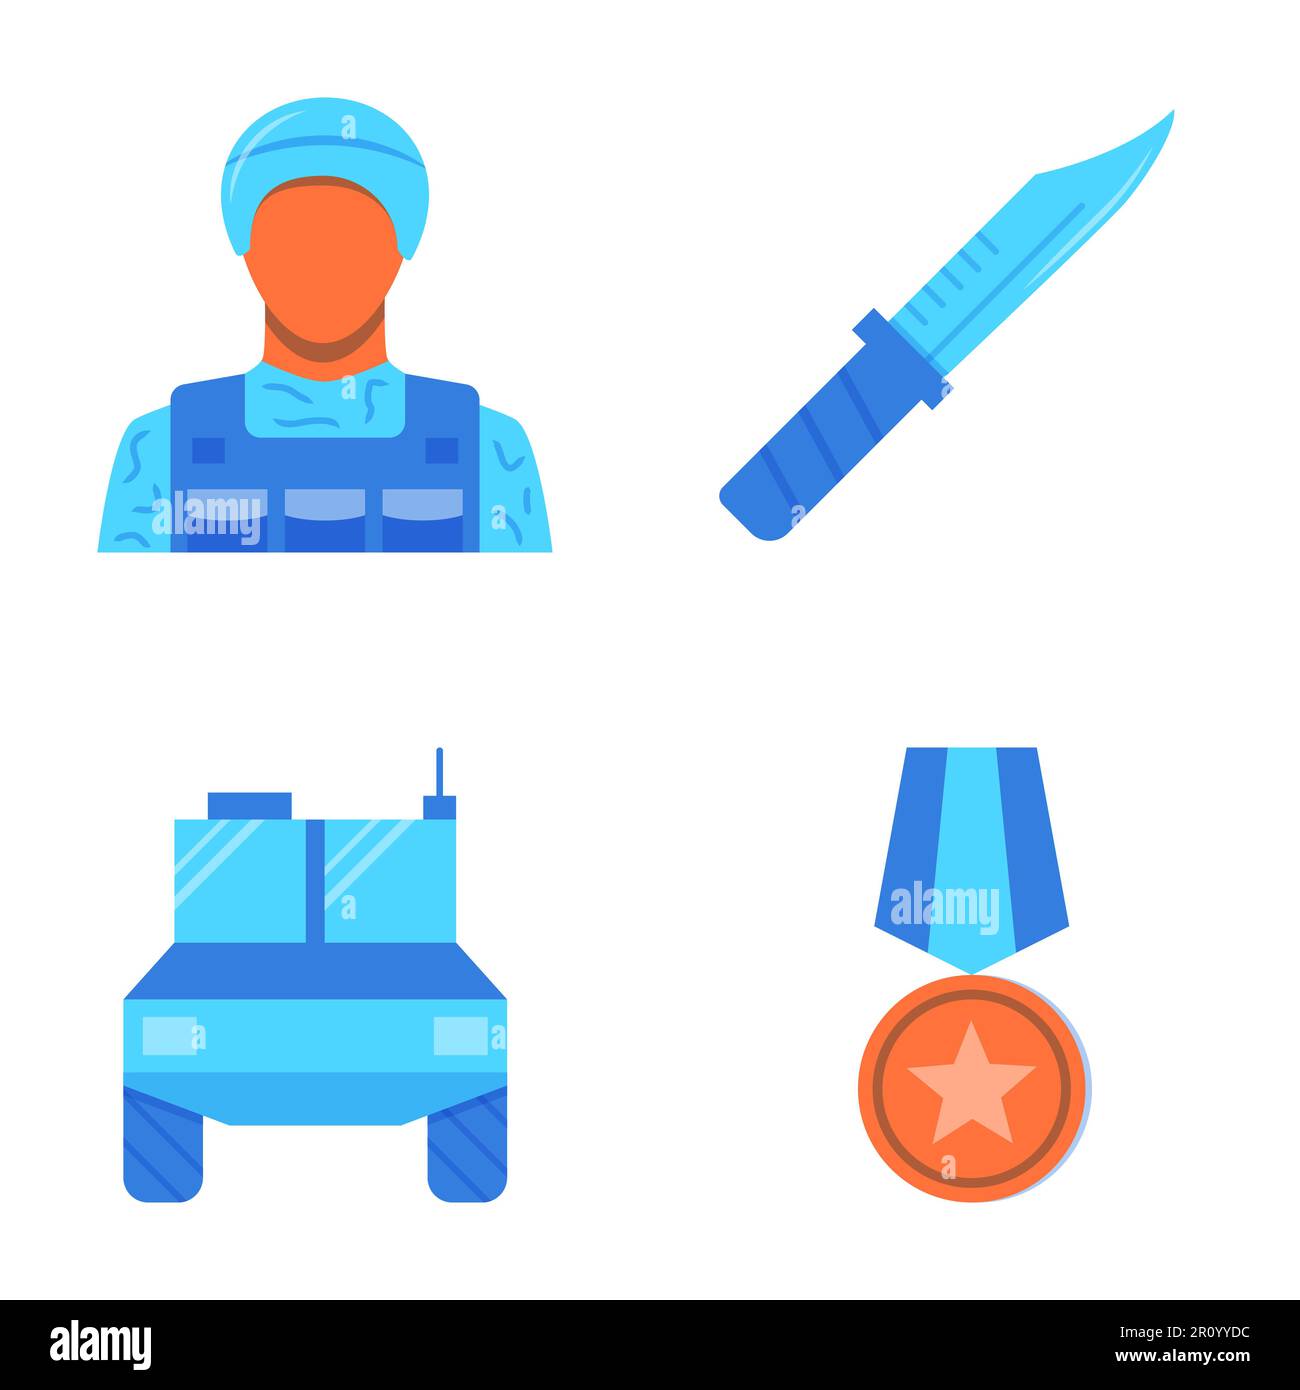 War and military icon set in flat and line style. Soldier, combat vehicle, medal and army knife symbols. Vector illustration. Stock Vector